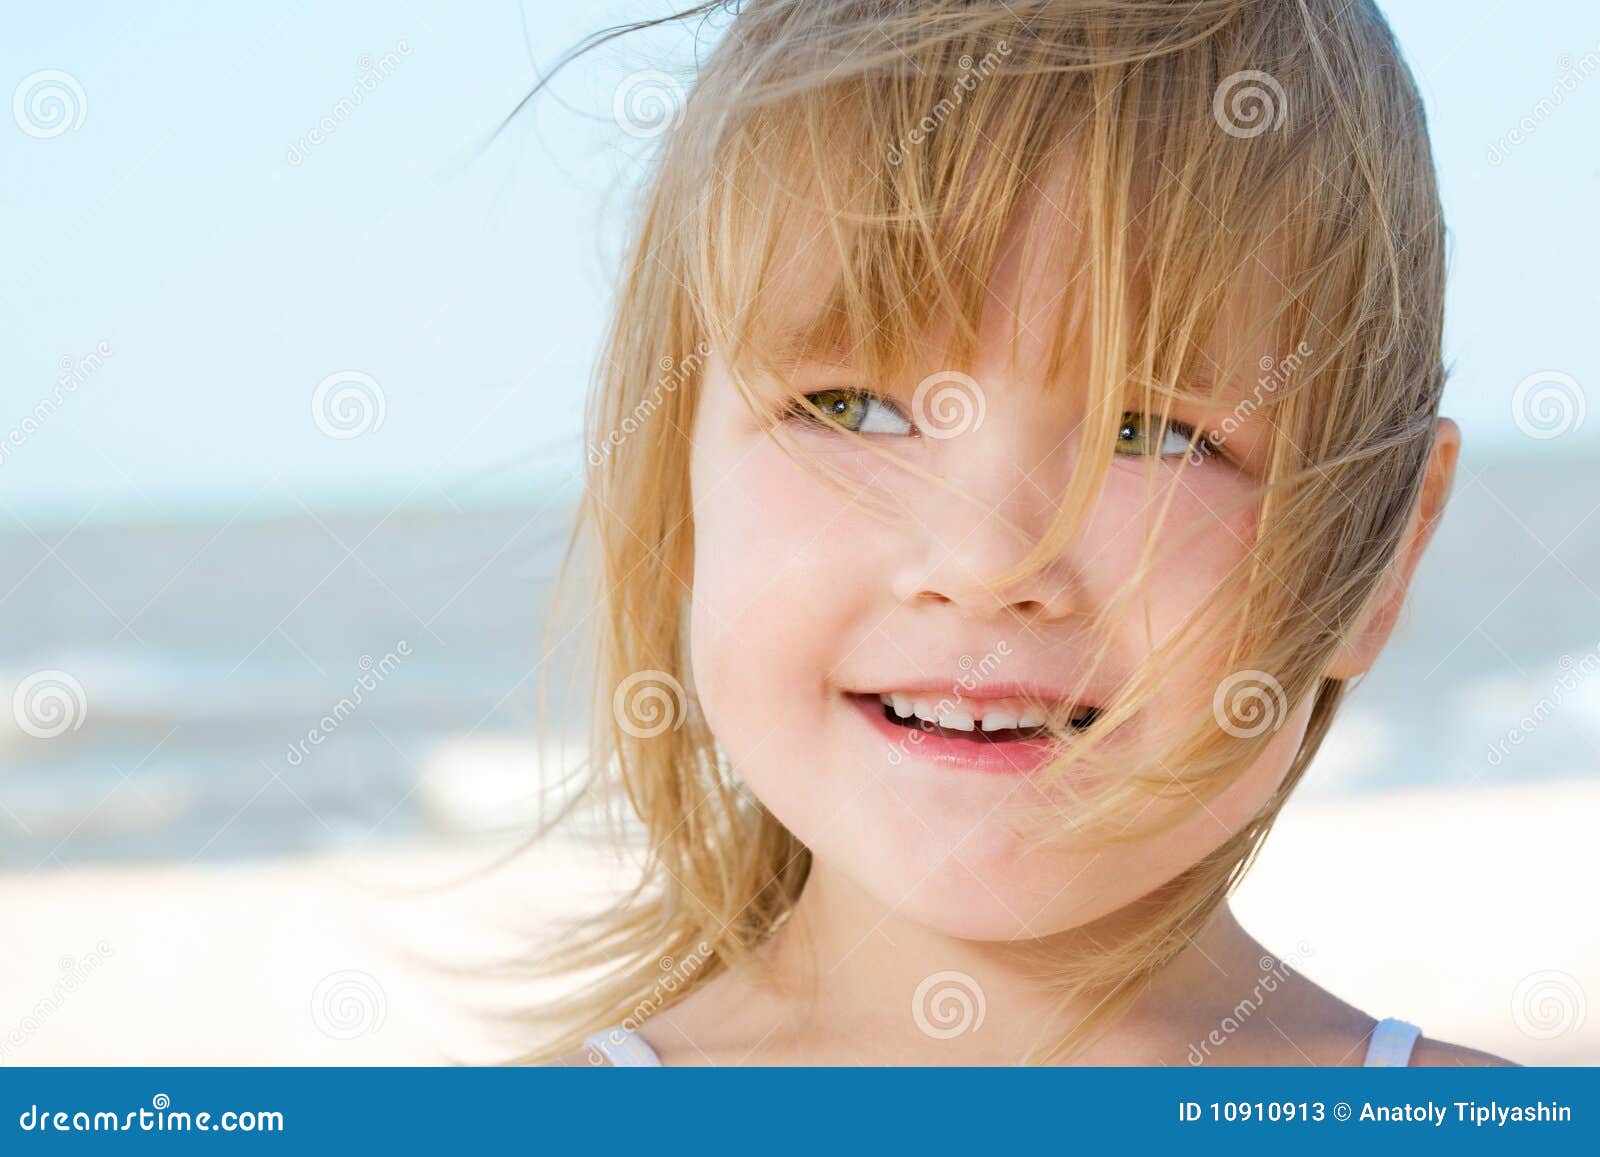 Face of little girl stock image. Image of person, child - 10910913